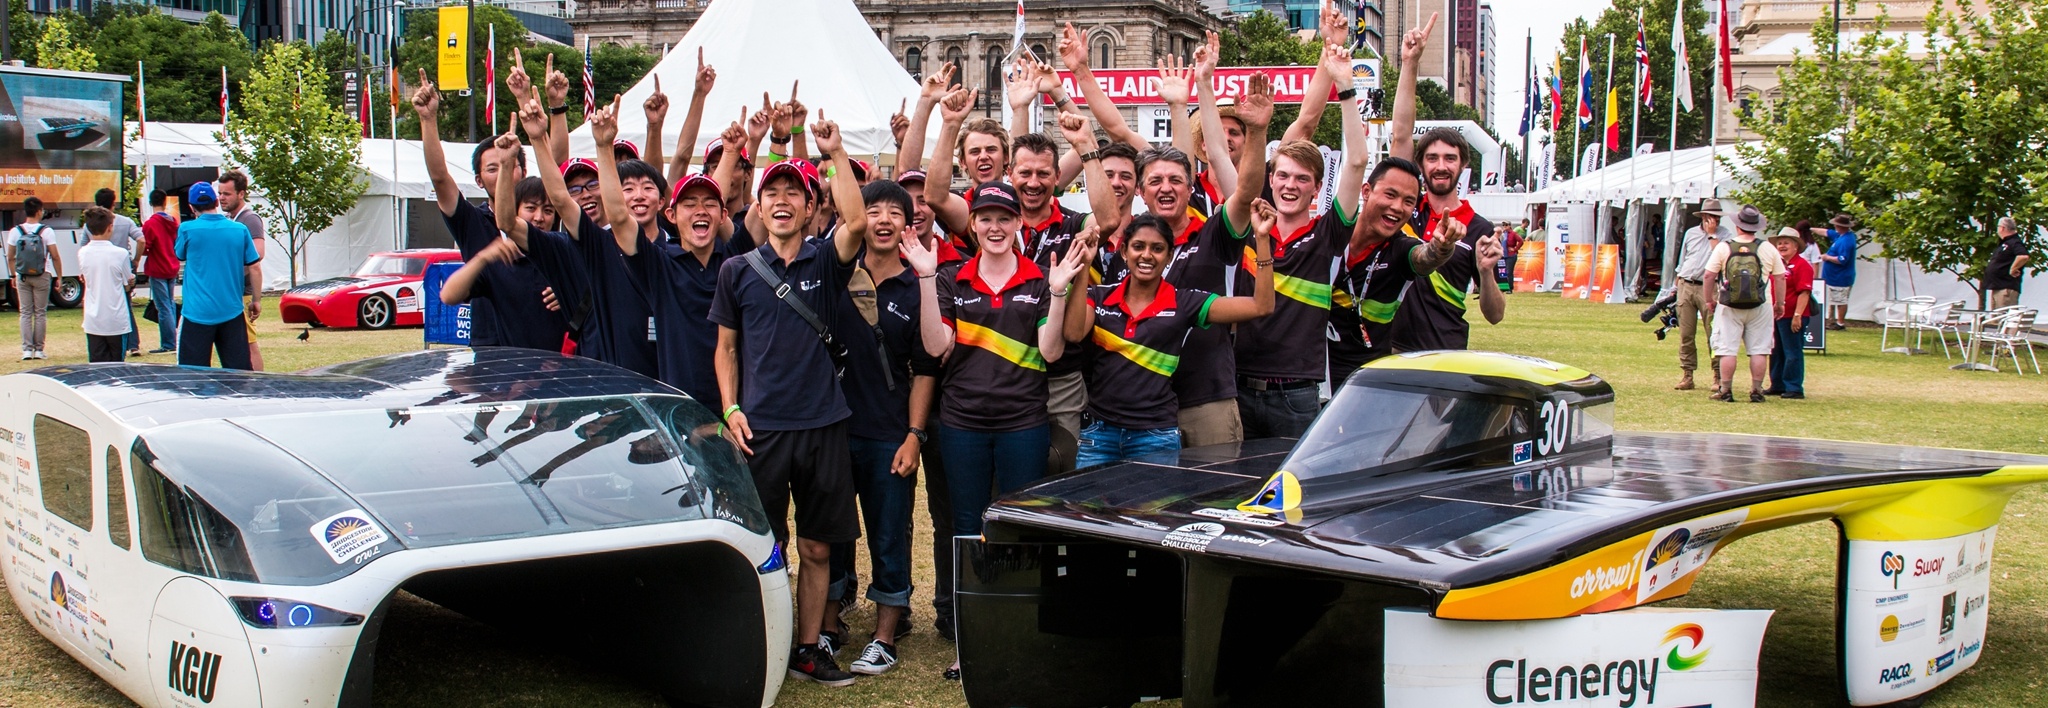 Clenergy Team Arrow at the World Solar Challenge in October, 2015